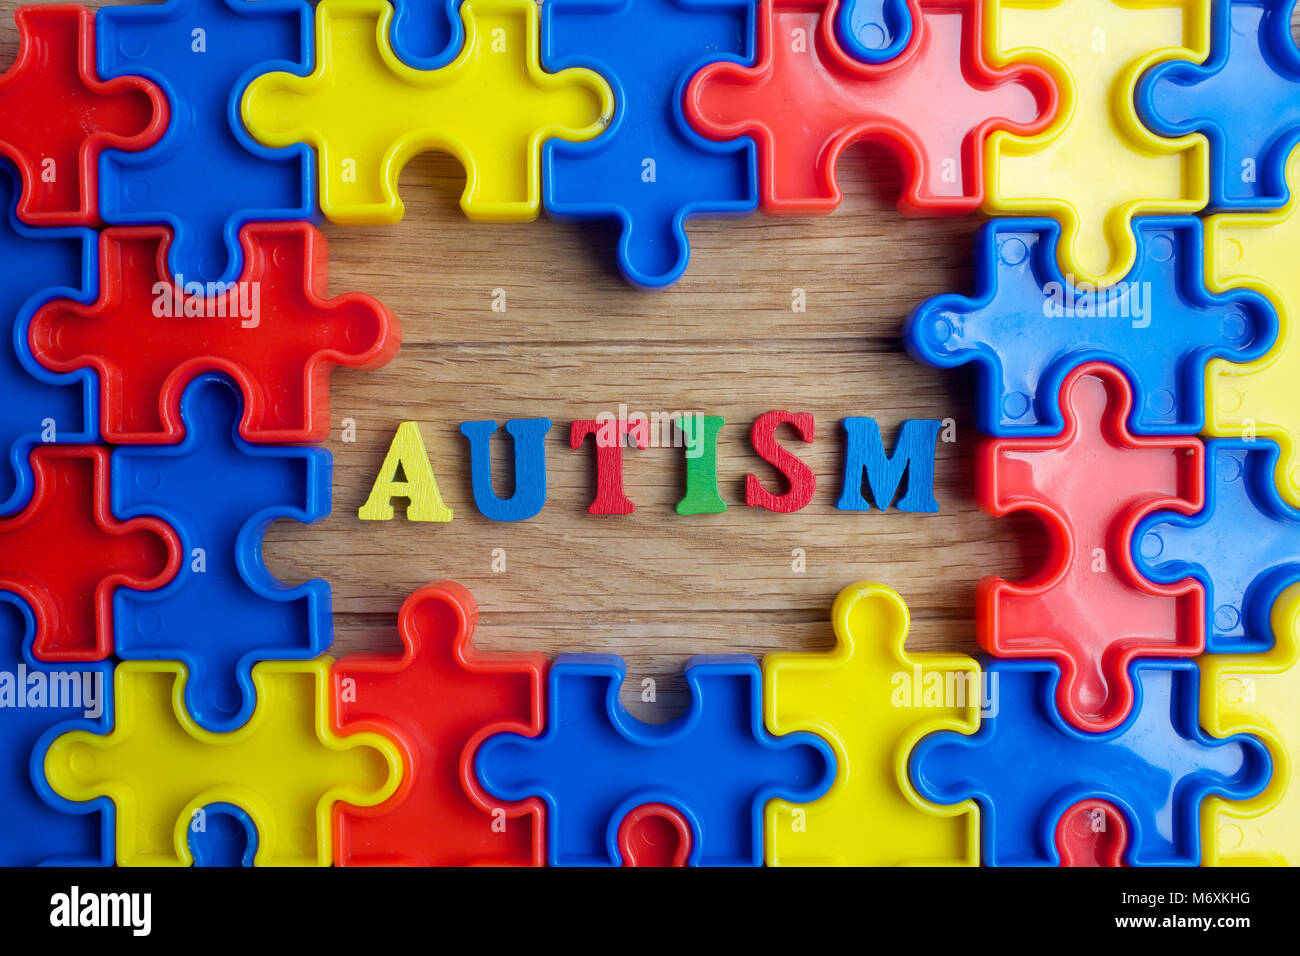 Pieces from a colorful jigsaw puzzle arranged to form a page on wooden background. Break barriers together for autism. Stock Photo